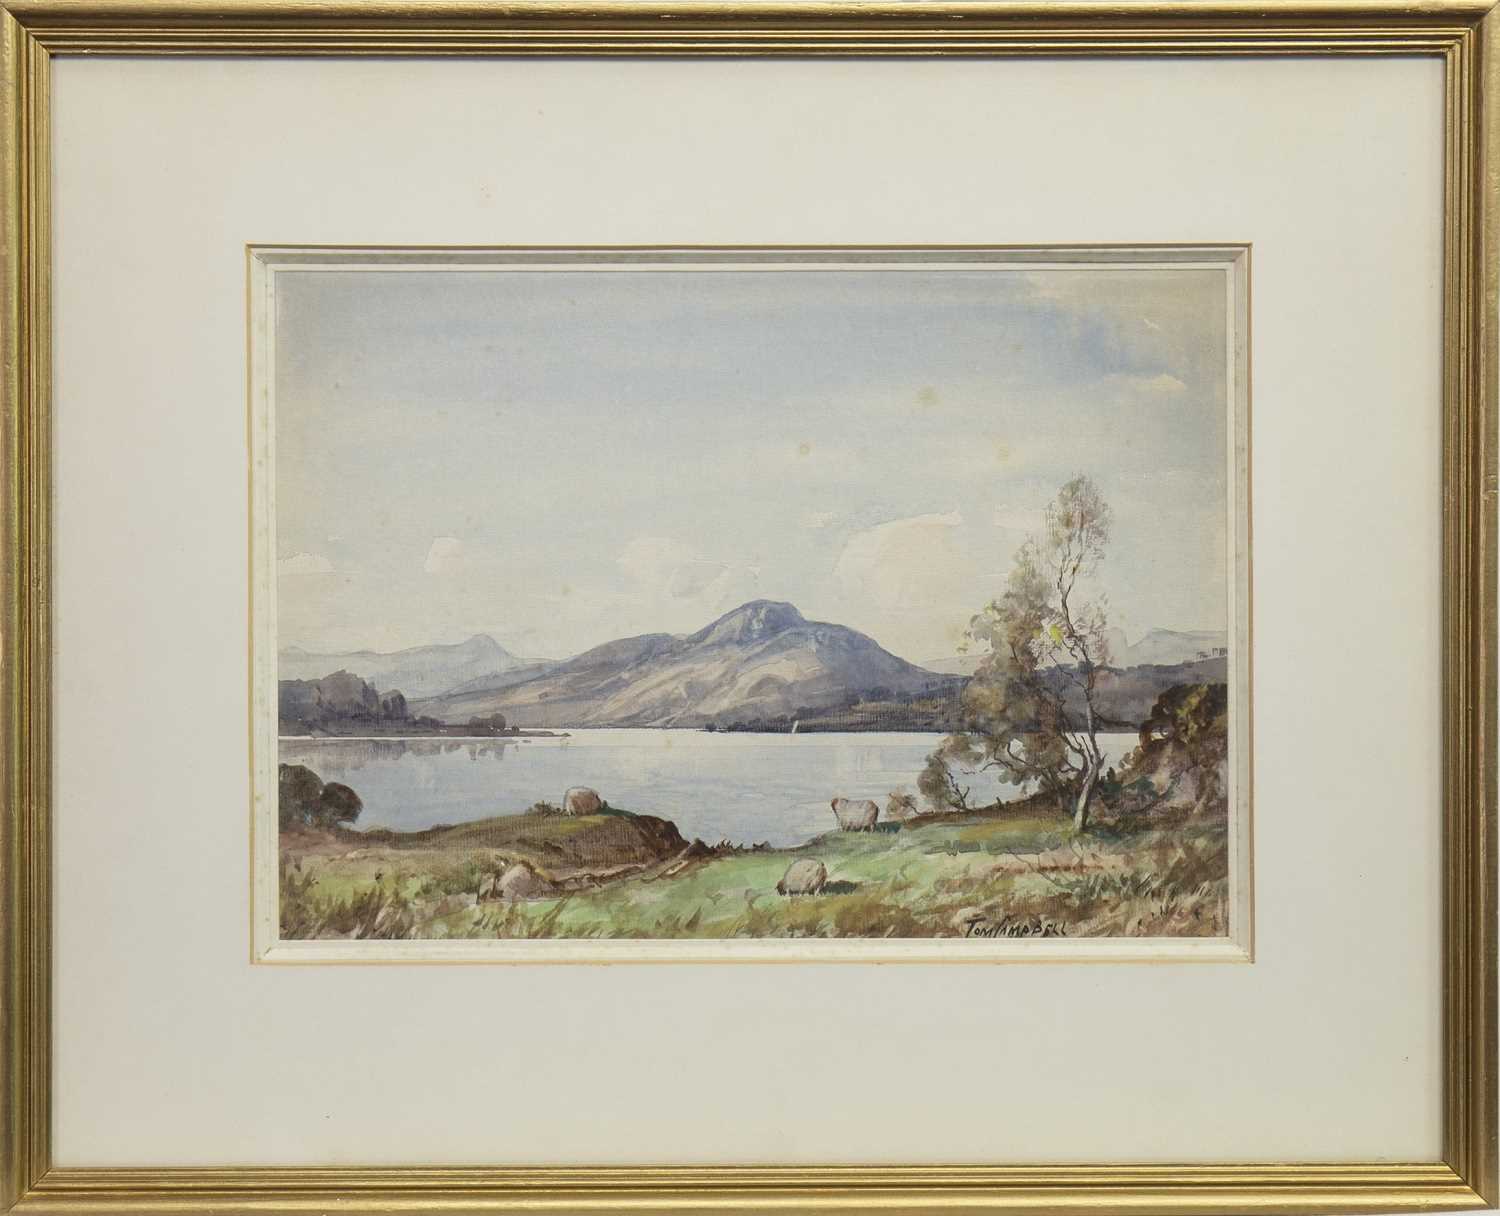 Lot 405 - SHEEP GRAZING BY A LOCH, A WATERCOLOUR BY TOM CAMPBELL